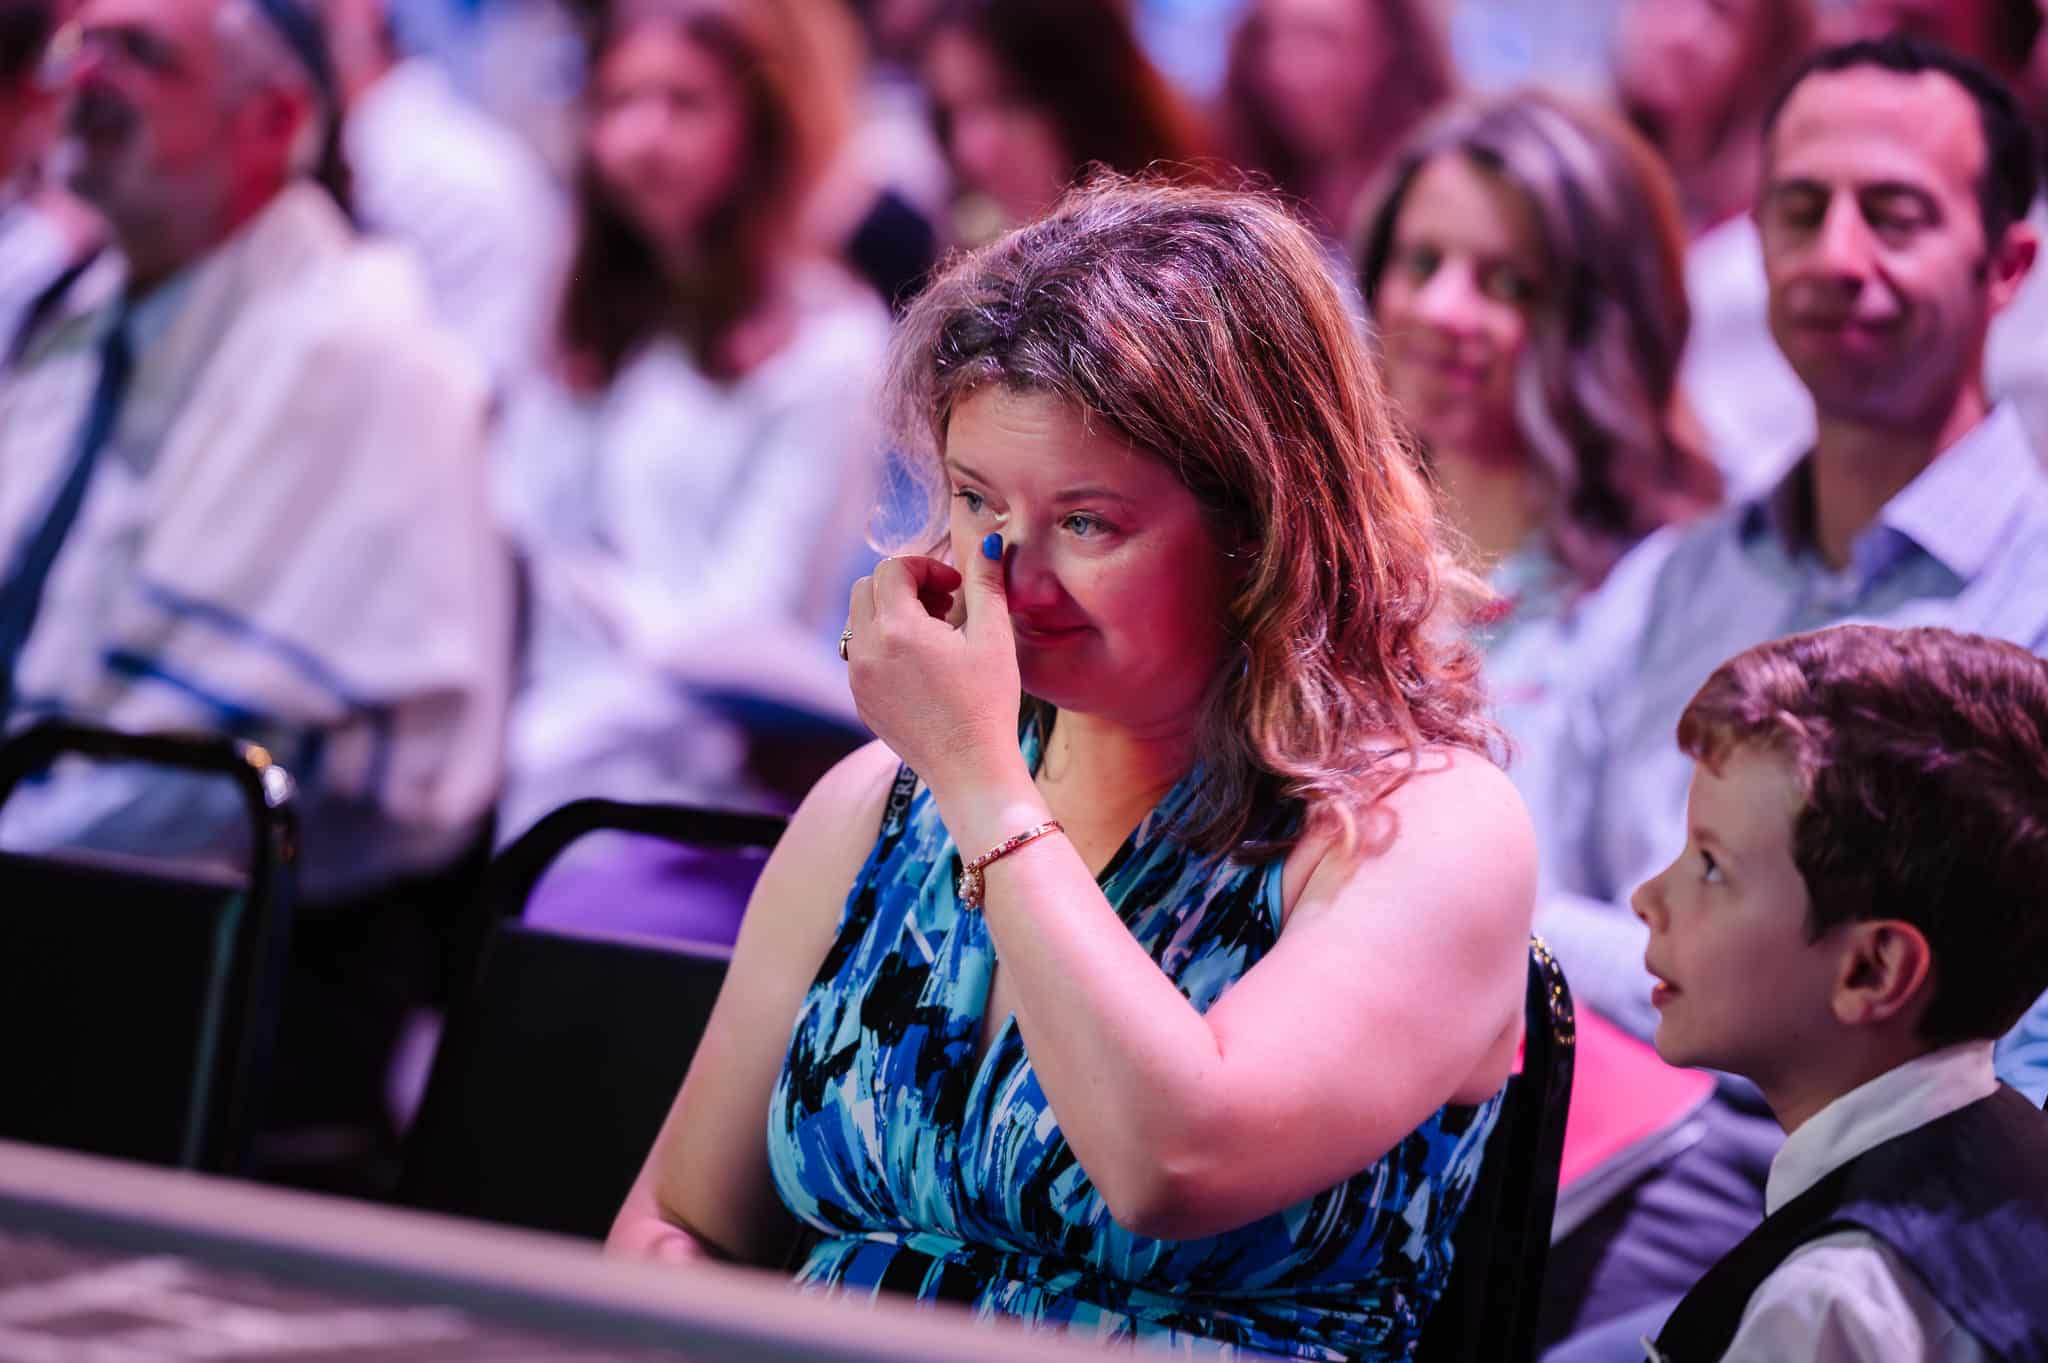 A teary-eyed mother listens to her daughter express words of appreciation during a mitzvah.